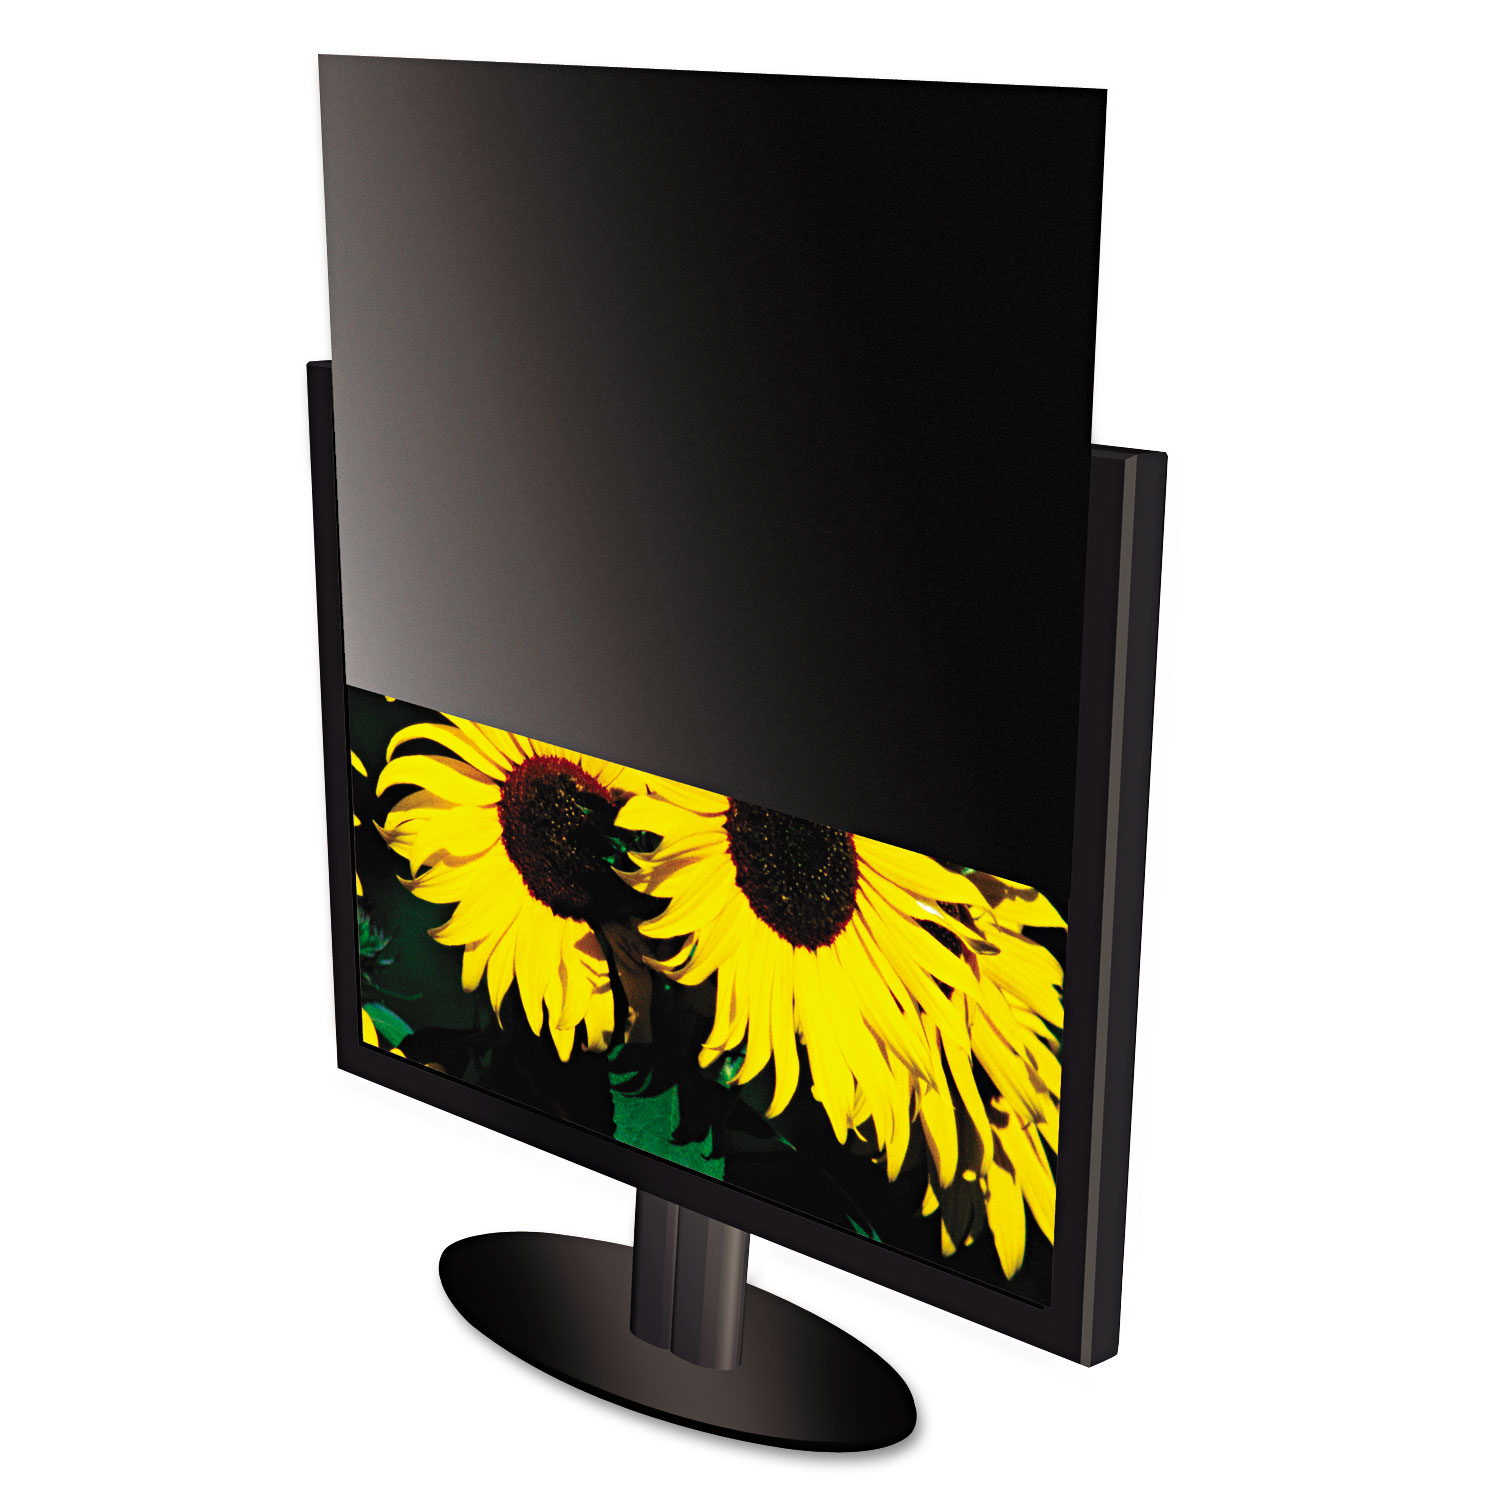  Kantek SVL19.0 Secure View Notebook LCD Privacy Filter, Fits 19 LCD Monitors (KTKSVL190) 